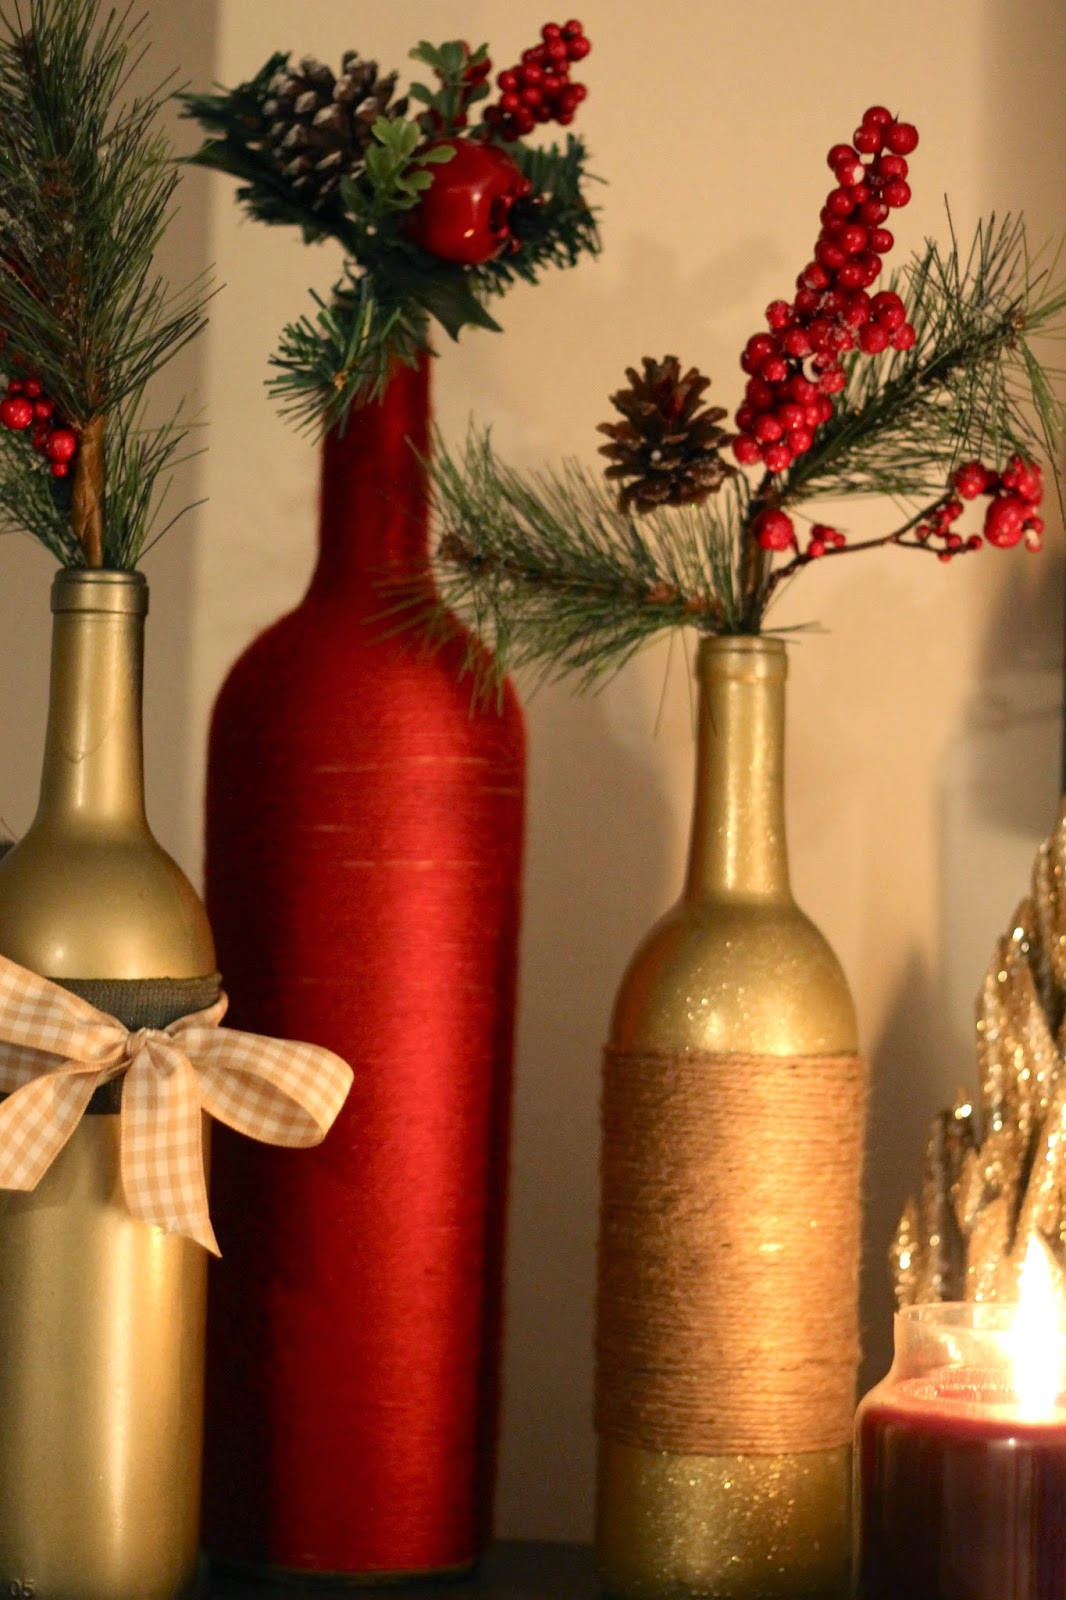 DIY Wine Bottle Christmas Decoration
 DIY Holiday Wine Bottles Pretty in the Pines North